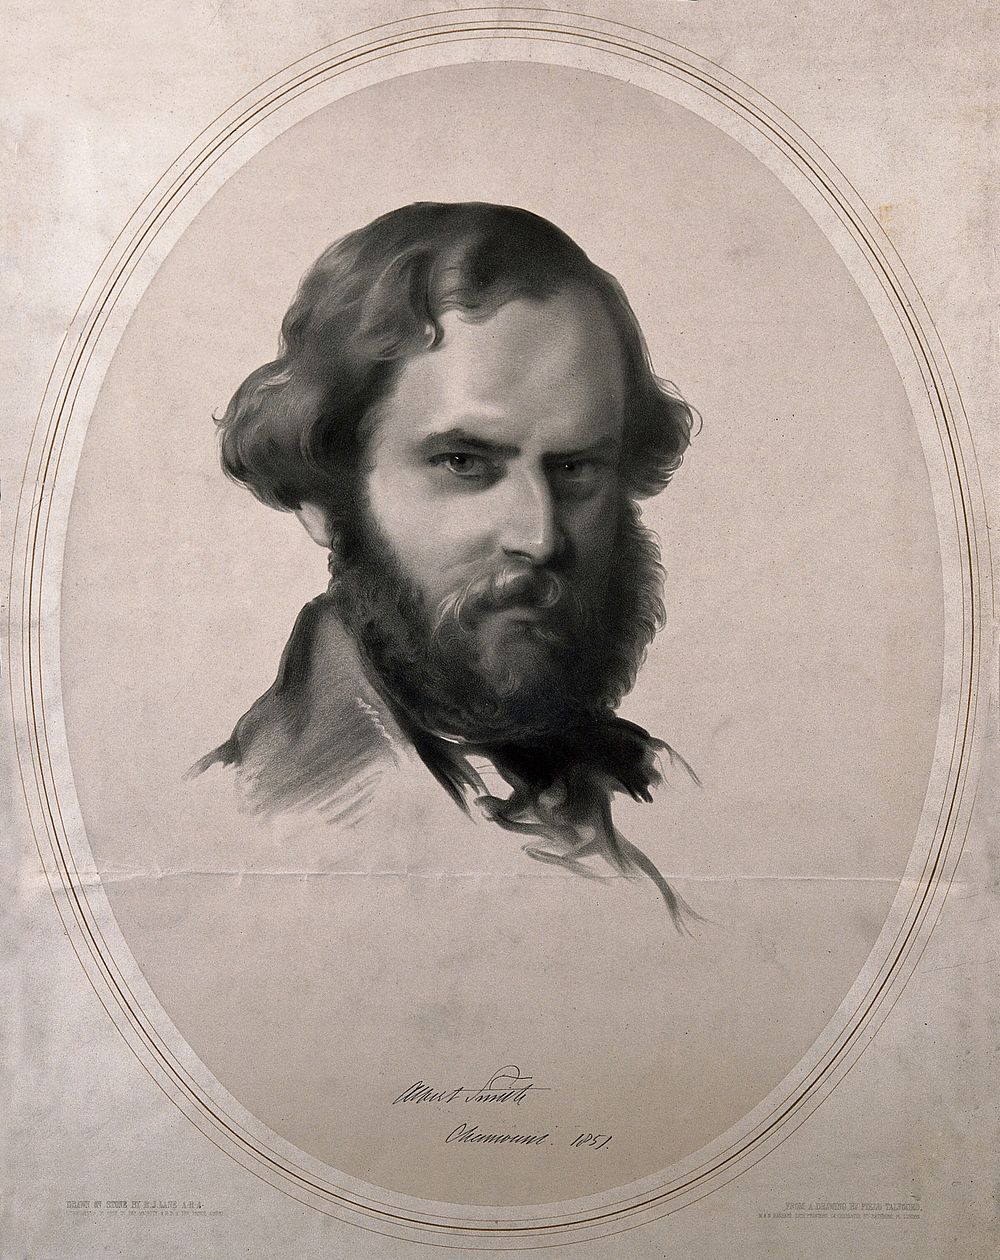 Albert Richard Smith. Lithograph by R. J. Lane after F. Talfourd, 1851.